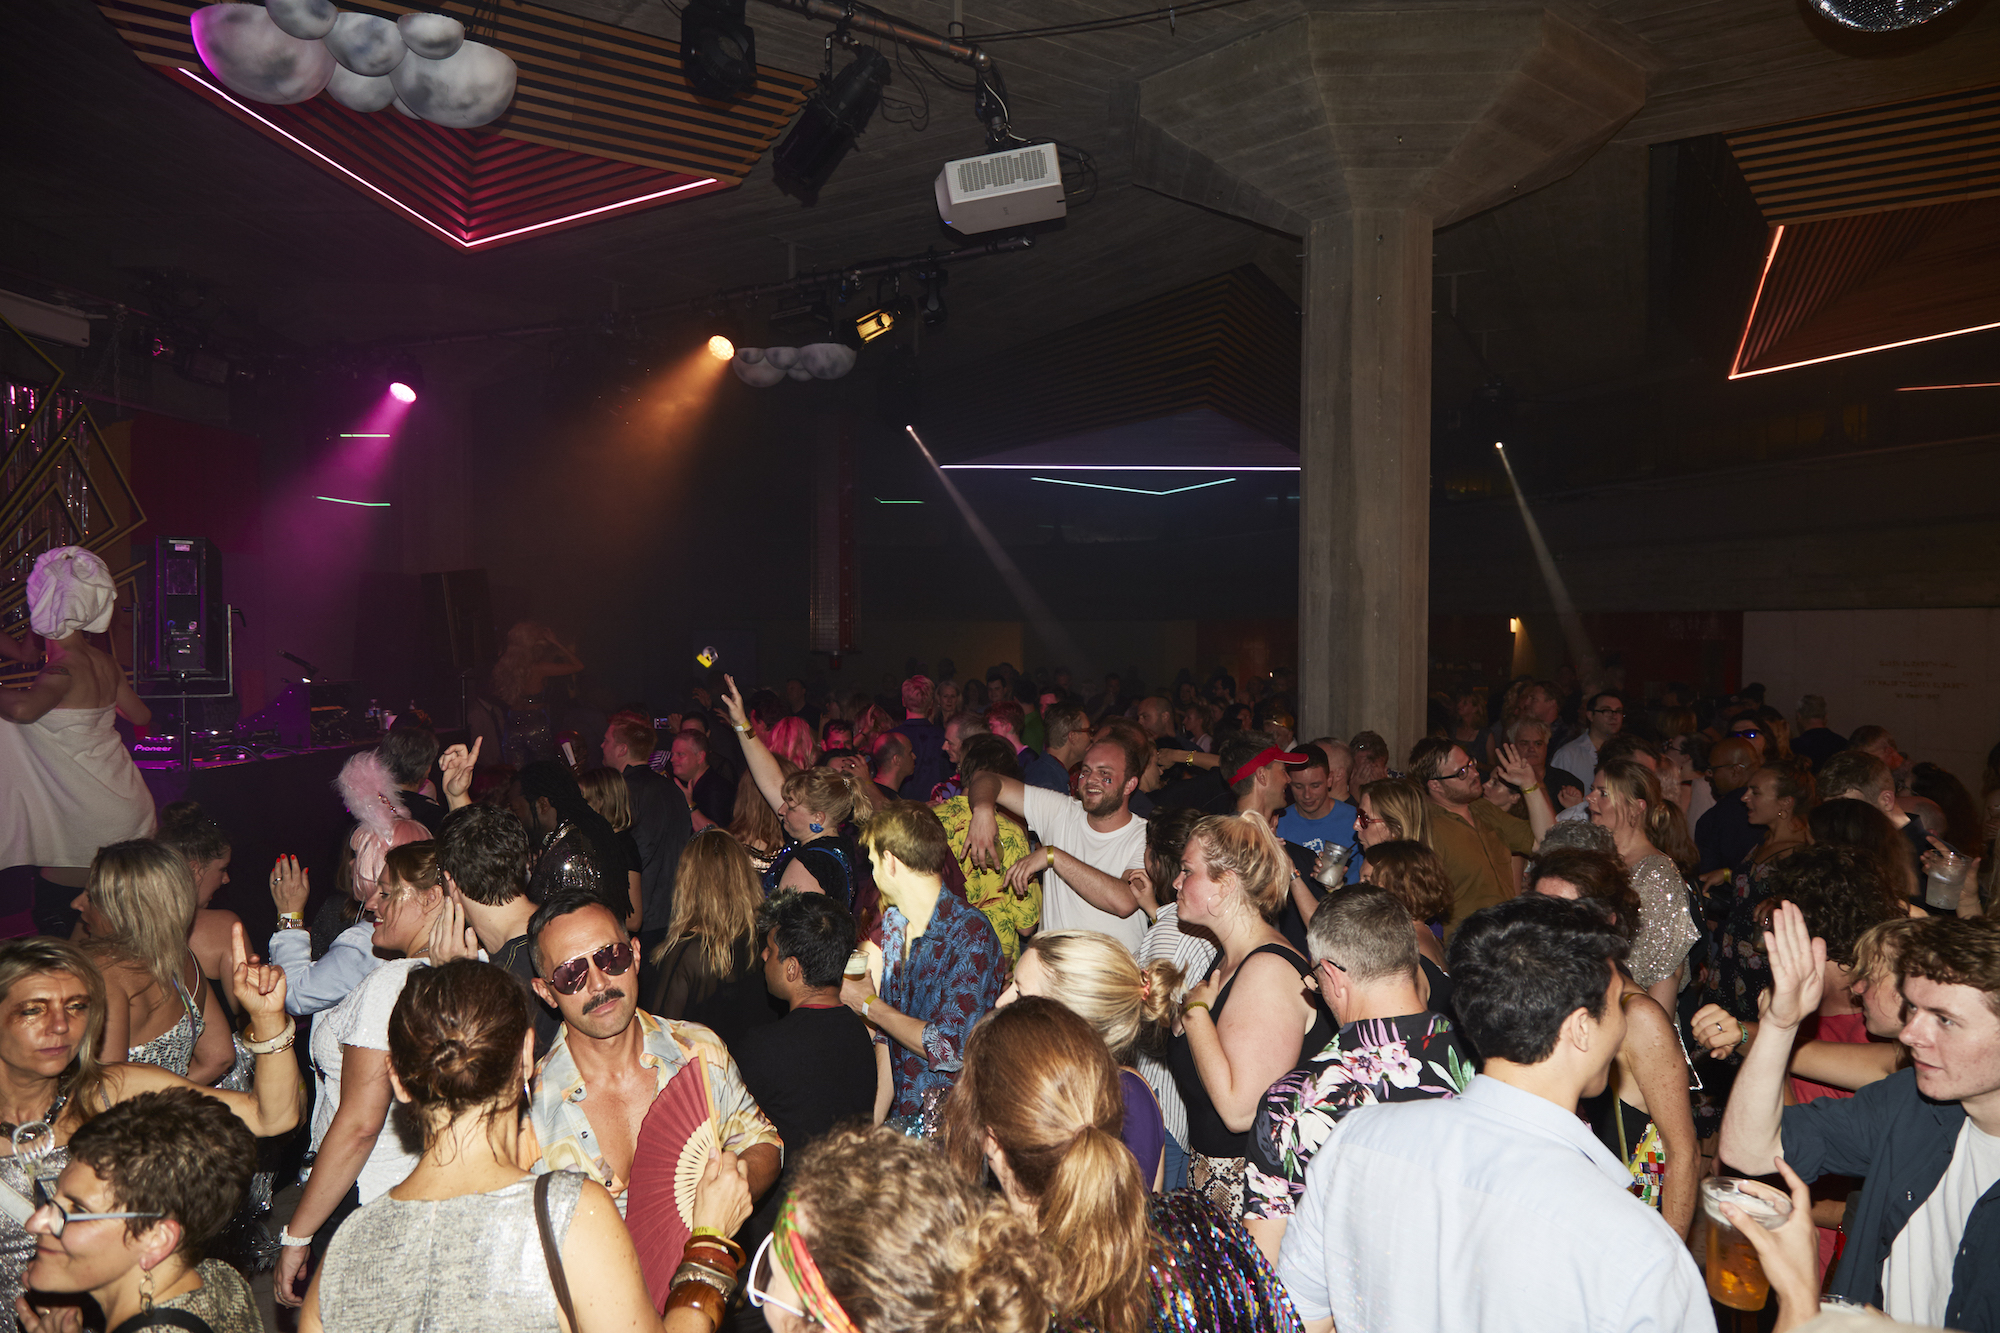 A Big Night Out At A Bootleg Studio 54 Vice